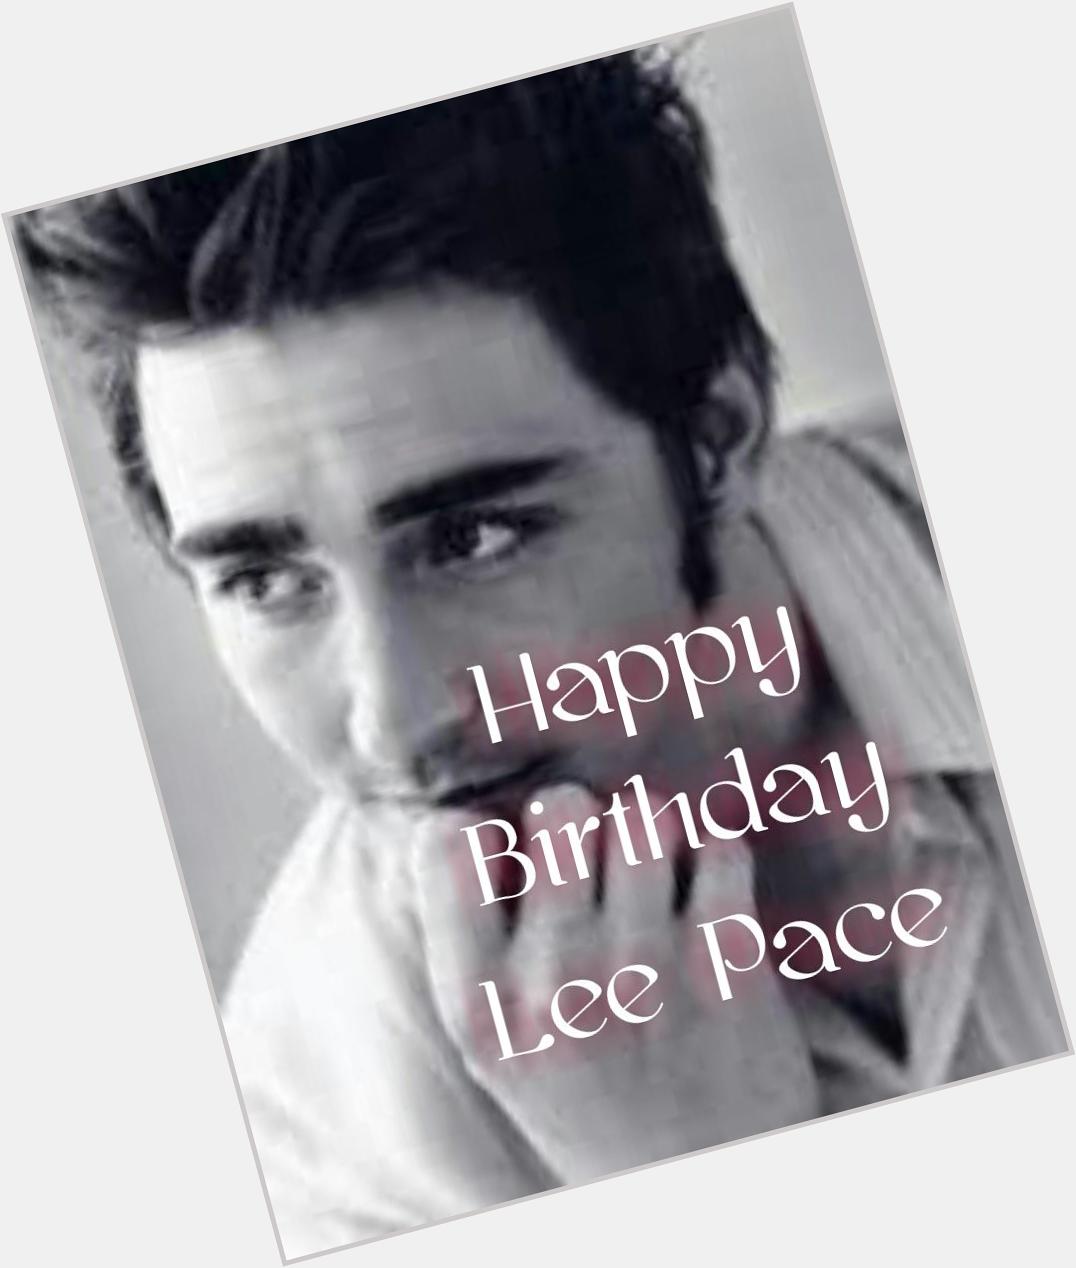  Happy Birthday Lee Pace wish all the best and :) 